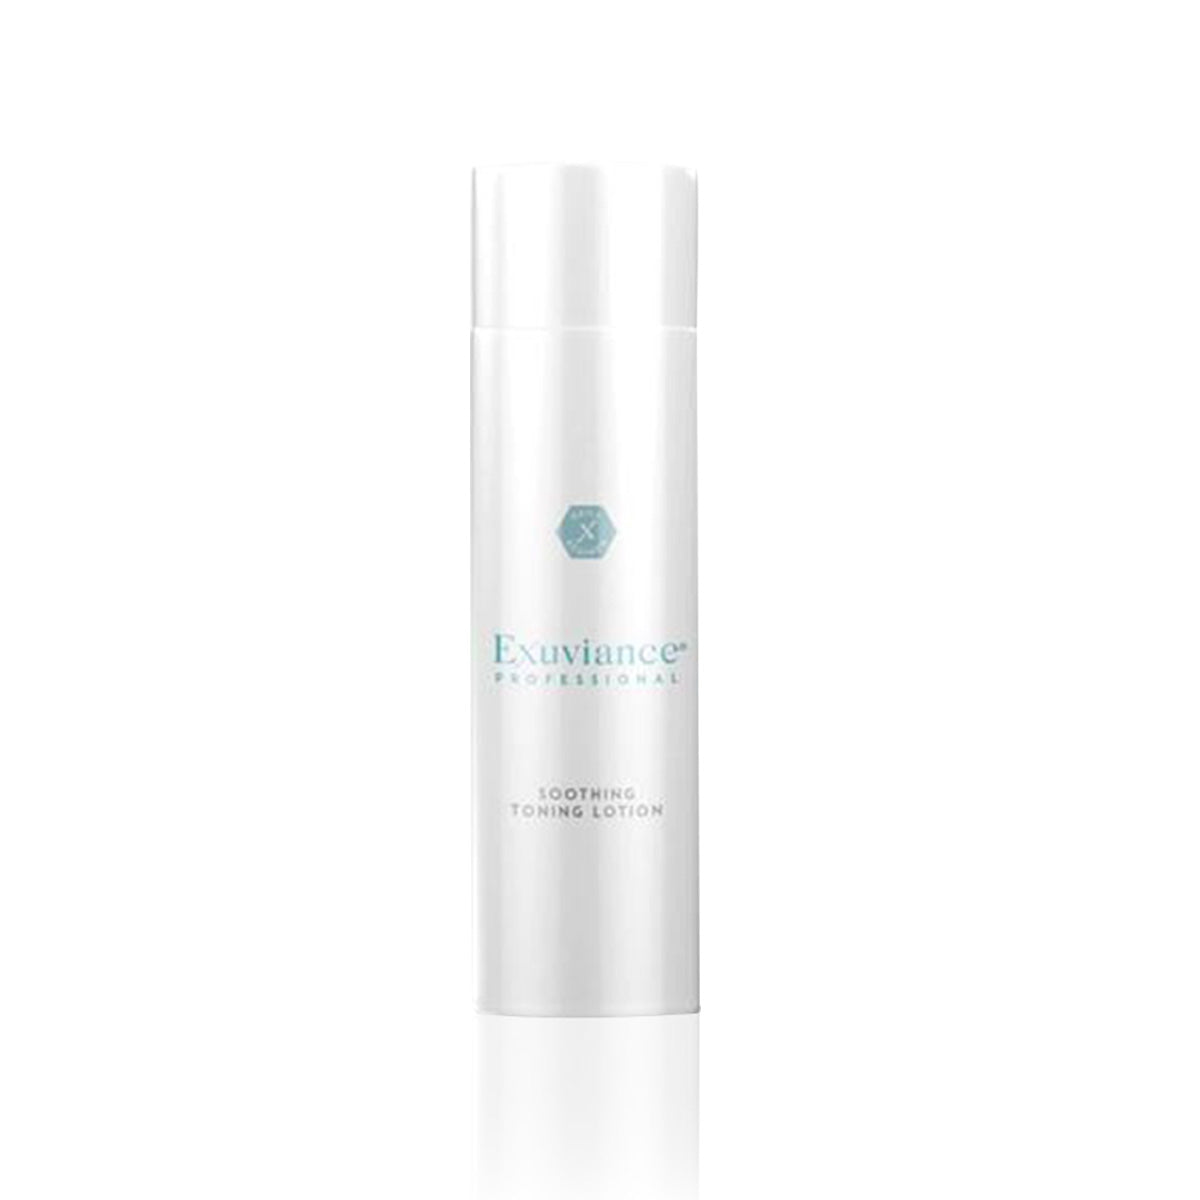 Exuviance Soothing Toning Lotion | Soothing Toning Lotion 200ml